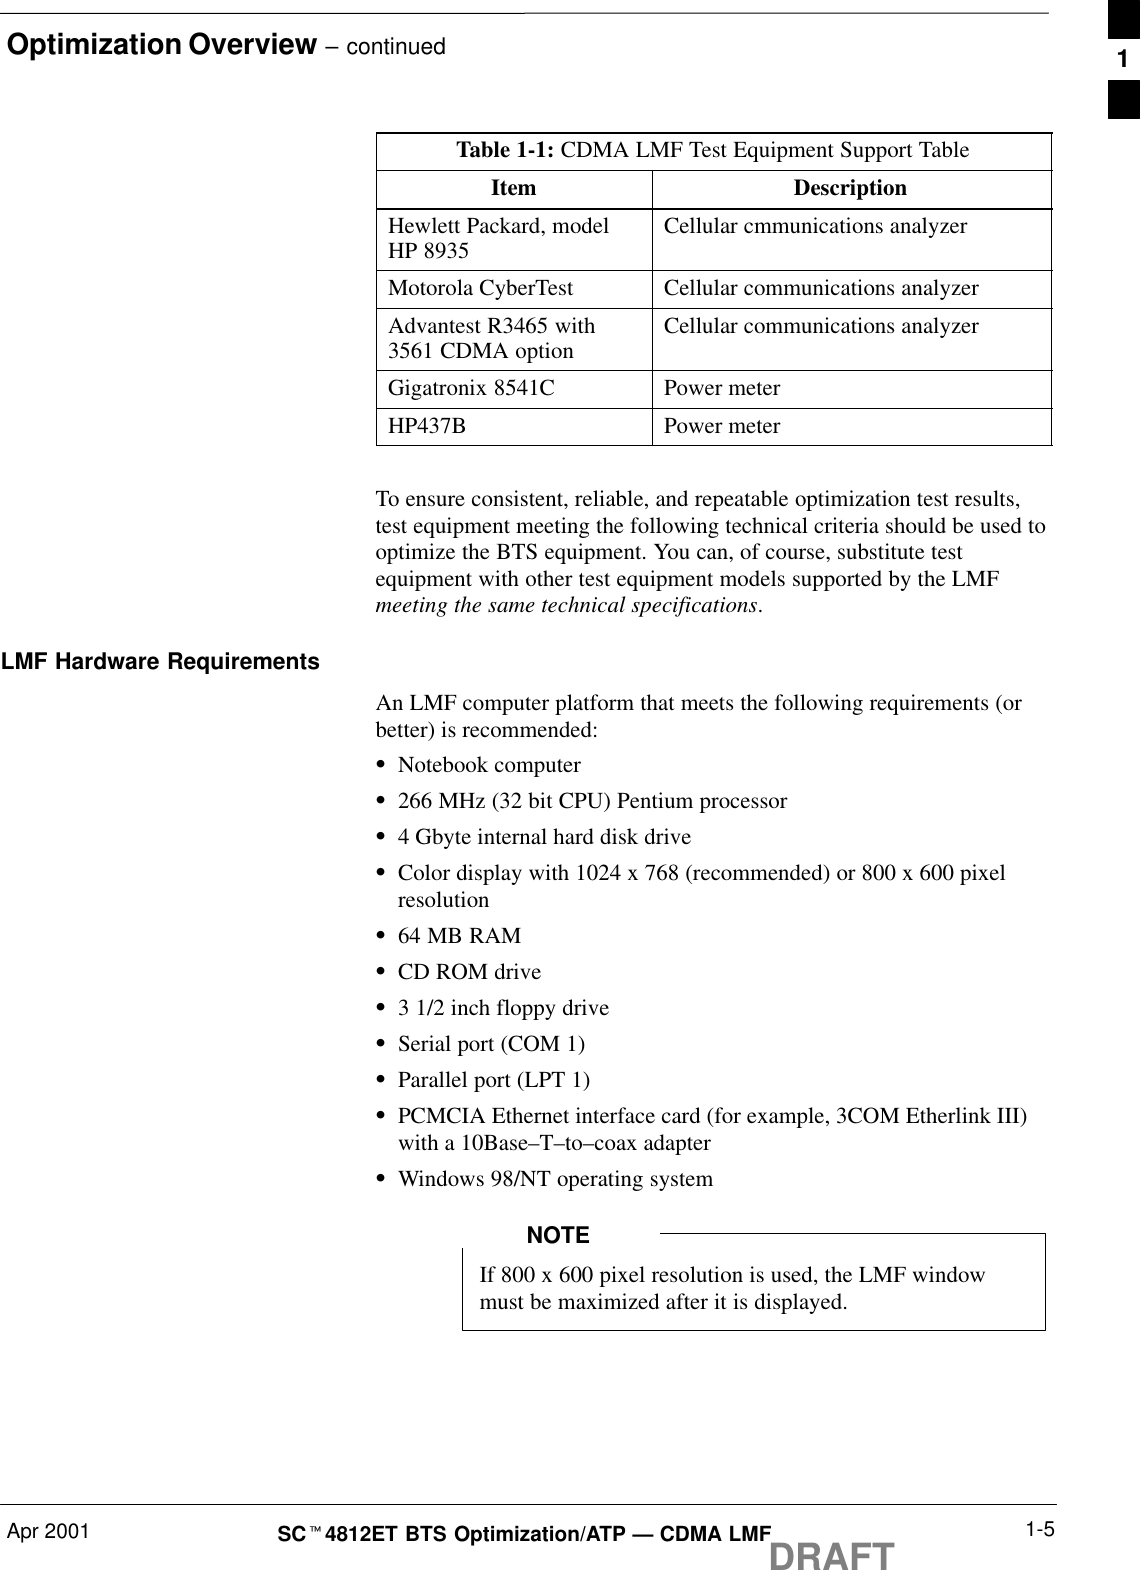 Optimization Overview – continuedApr 2001 1-5SCt4812ET BTS Optimization/ATP — CDMA LMFDRAFTTable 1-1: CDMA LMF Test Equipment Support TableItem DescriptionHewlett Packard, modelHP 8935 Cellular cmmunications analyzerMotorola CyberTest Cellular communications analyzerAdvantest R3465 with3561 CDMA option Cellular communications analyzerGigatronix 8541C Power meterHP437B Power meter To ensure consistent, reliable, and repeatable optimization test results,test equipment meeting the following technical criteria should be used tooptimize the BTS equipment. You can, of course, substitute testequipment with other test equipment models supported by the LMFmeeting the same technical specifications.LMF Hardware RequirementsAn LMF computer platform that meets the following requirements (orbetter) is recommended:SNotebook computerS266 MHz (32 bit CPU) Pentium processorS4 Gbyte internal hard disk driveSColor display with 1024 x 768 (recommended) or 800 x 600 pixelresolutionS64 MB RAMSCD ROM driveS3 1/2 inch floppy driveSSerial port (COM 1)SParallel port (LPT 1)SPCMCIA Ethernet interface card (for example, 3COM Etherlink III)with a 10Base–T–to–coax adapterSWindows 98/NT operating systemIf 800 x 600 pixel resolution is used, the LMF windowmust be maximized after it is displayed.NOTE1